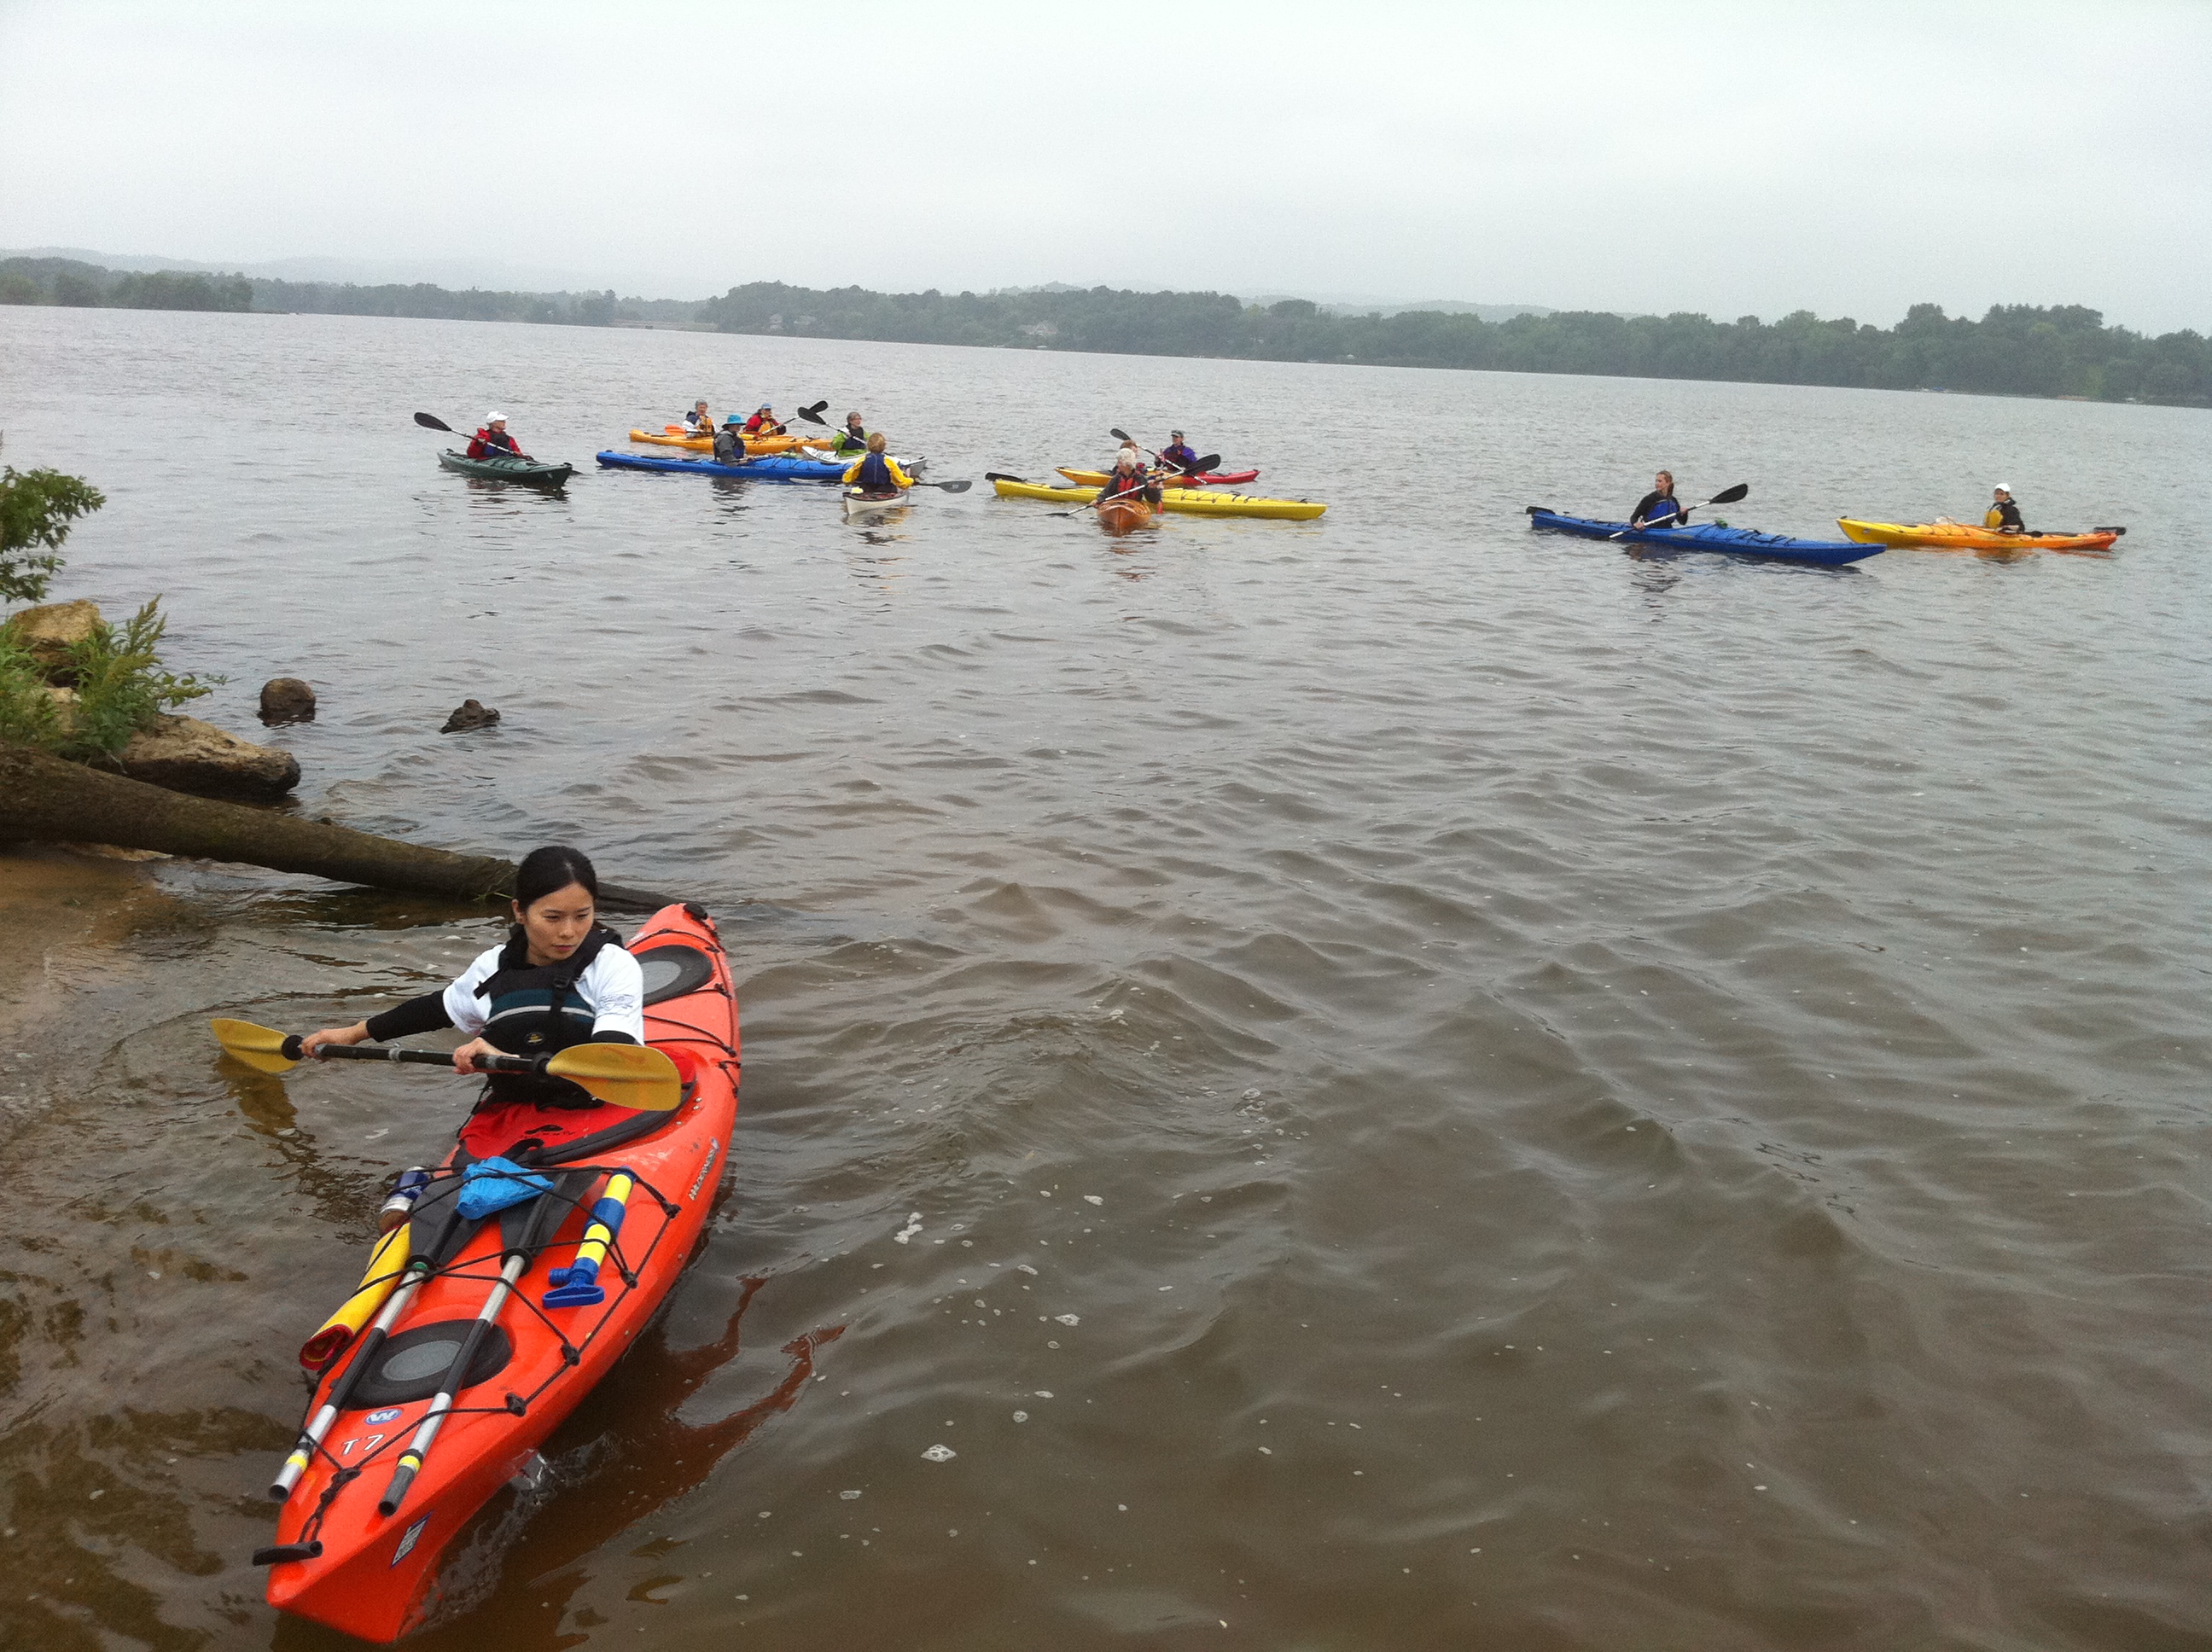 Yu Ting Fu gets into the Mississippi River backwaters to kayak with the rest of the crew.